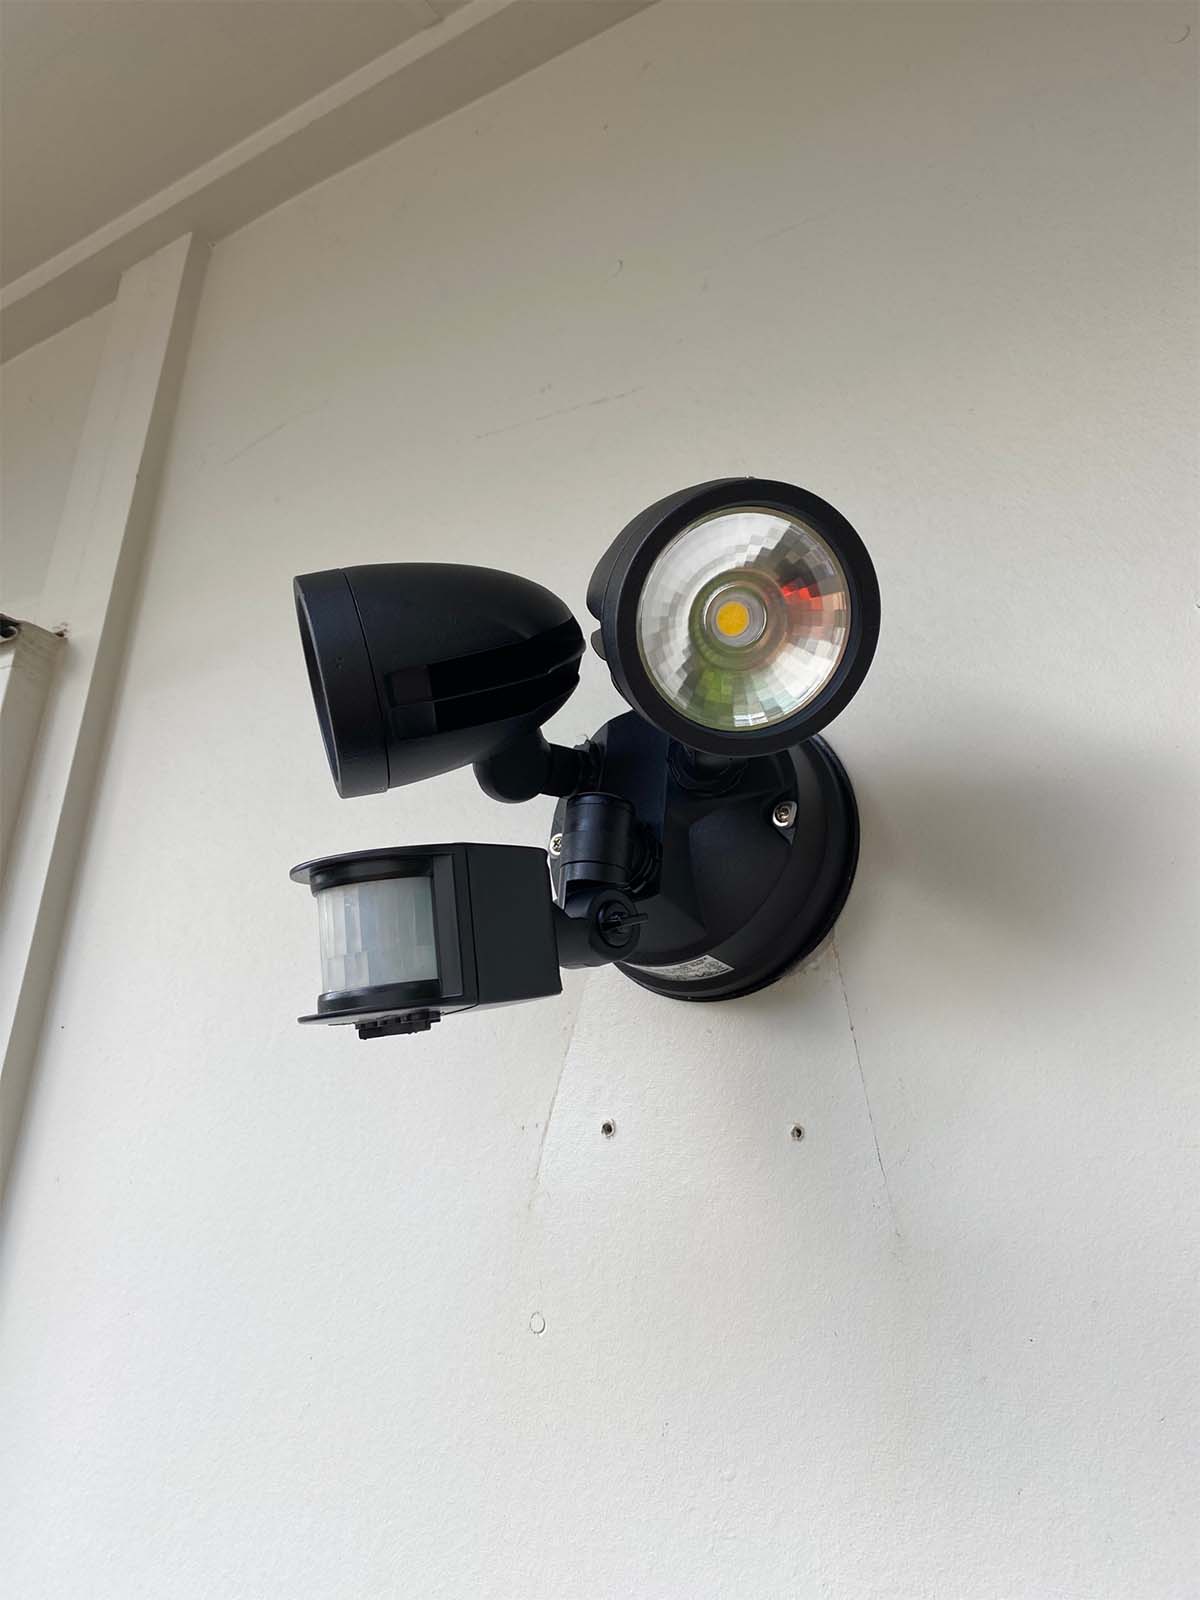 Wall Mounted Sensor Spotlight Installed By Sparkies Plus Electricians On The Sunshine Coast QLD